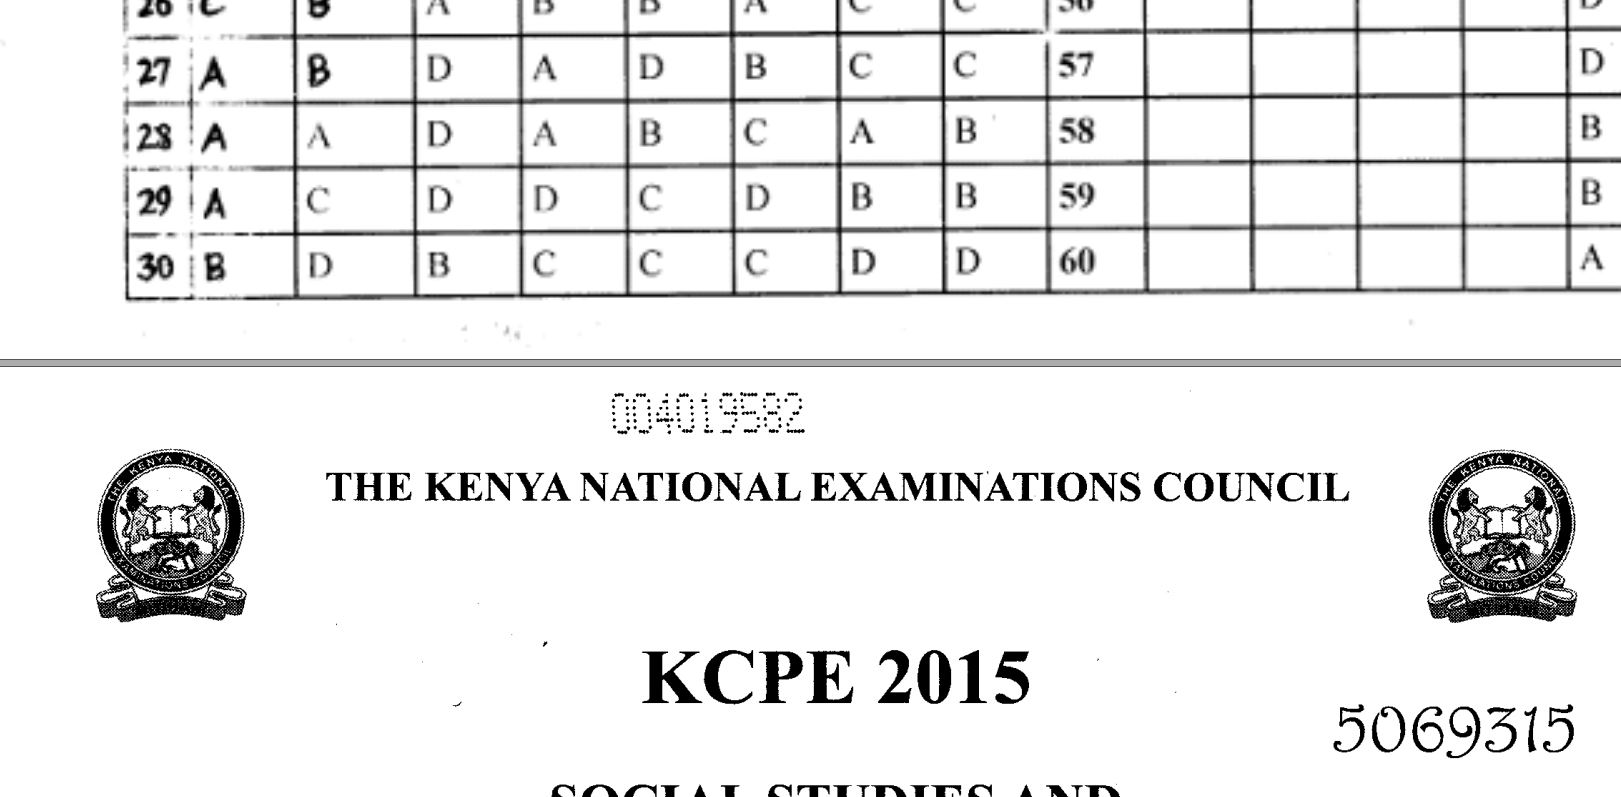 KNEC KCPE 2015 Past Papers wit Marking scheme Answers (All Subjects)